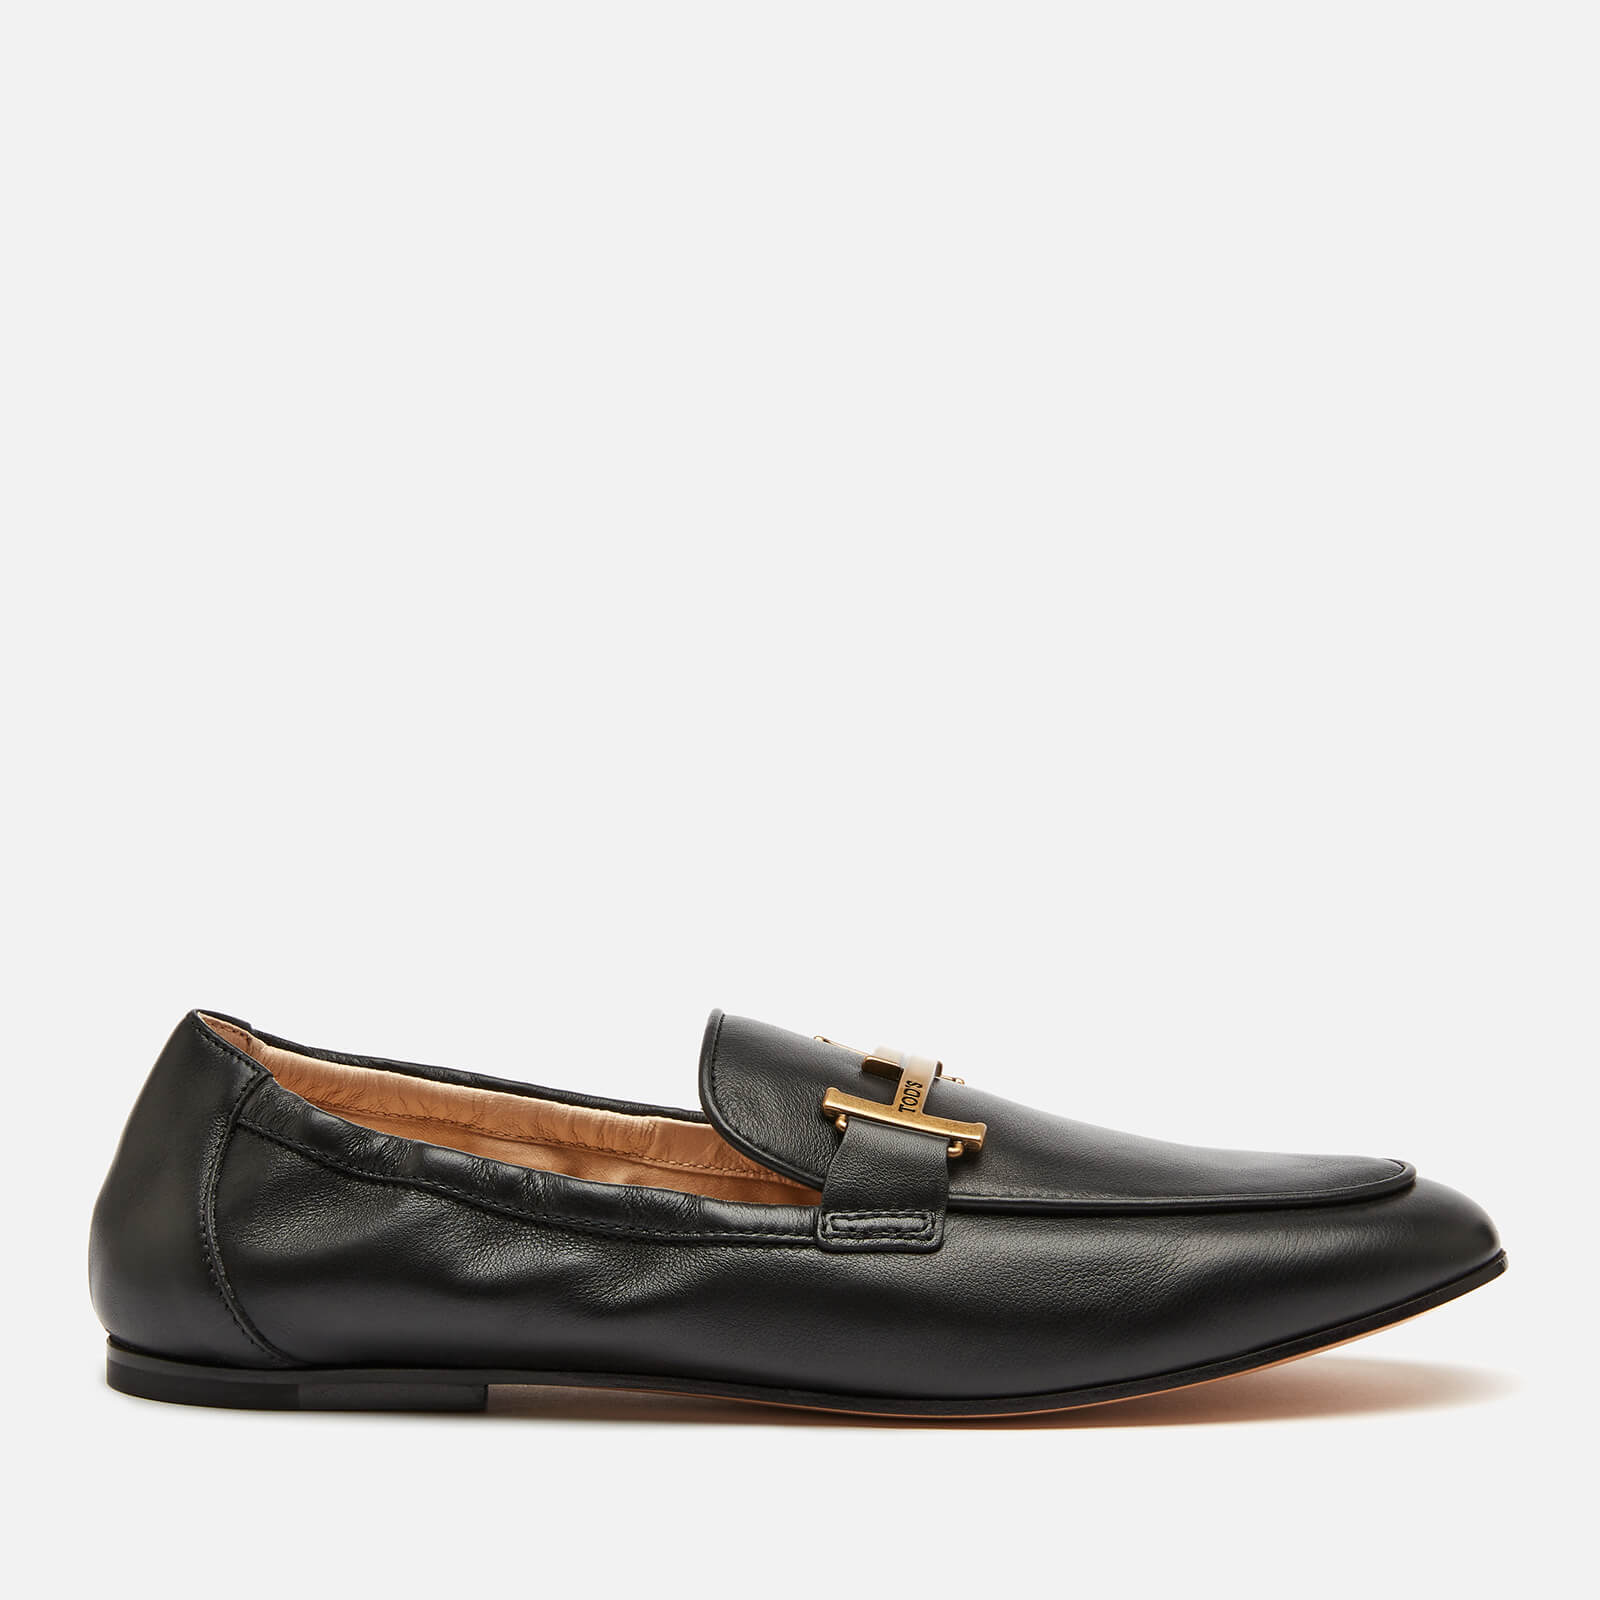 Tod's Women's Double T Leather Loafers - Black - UK 3